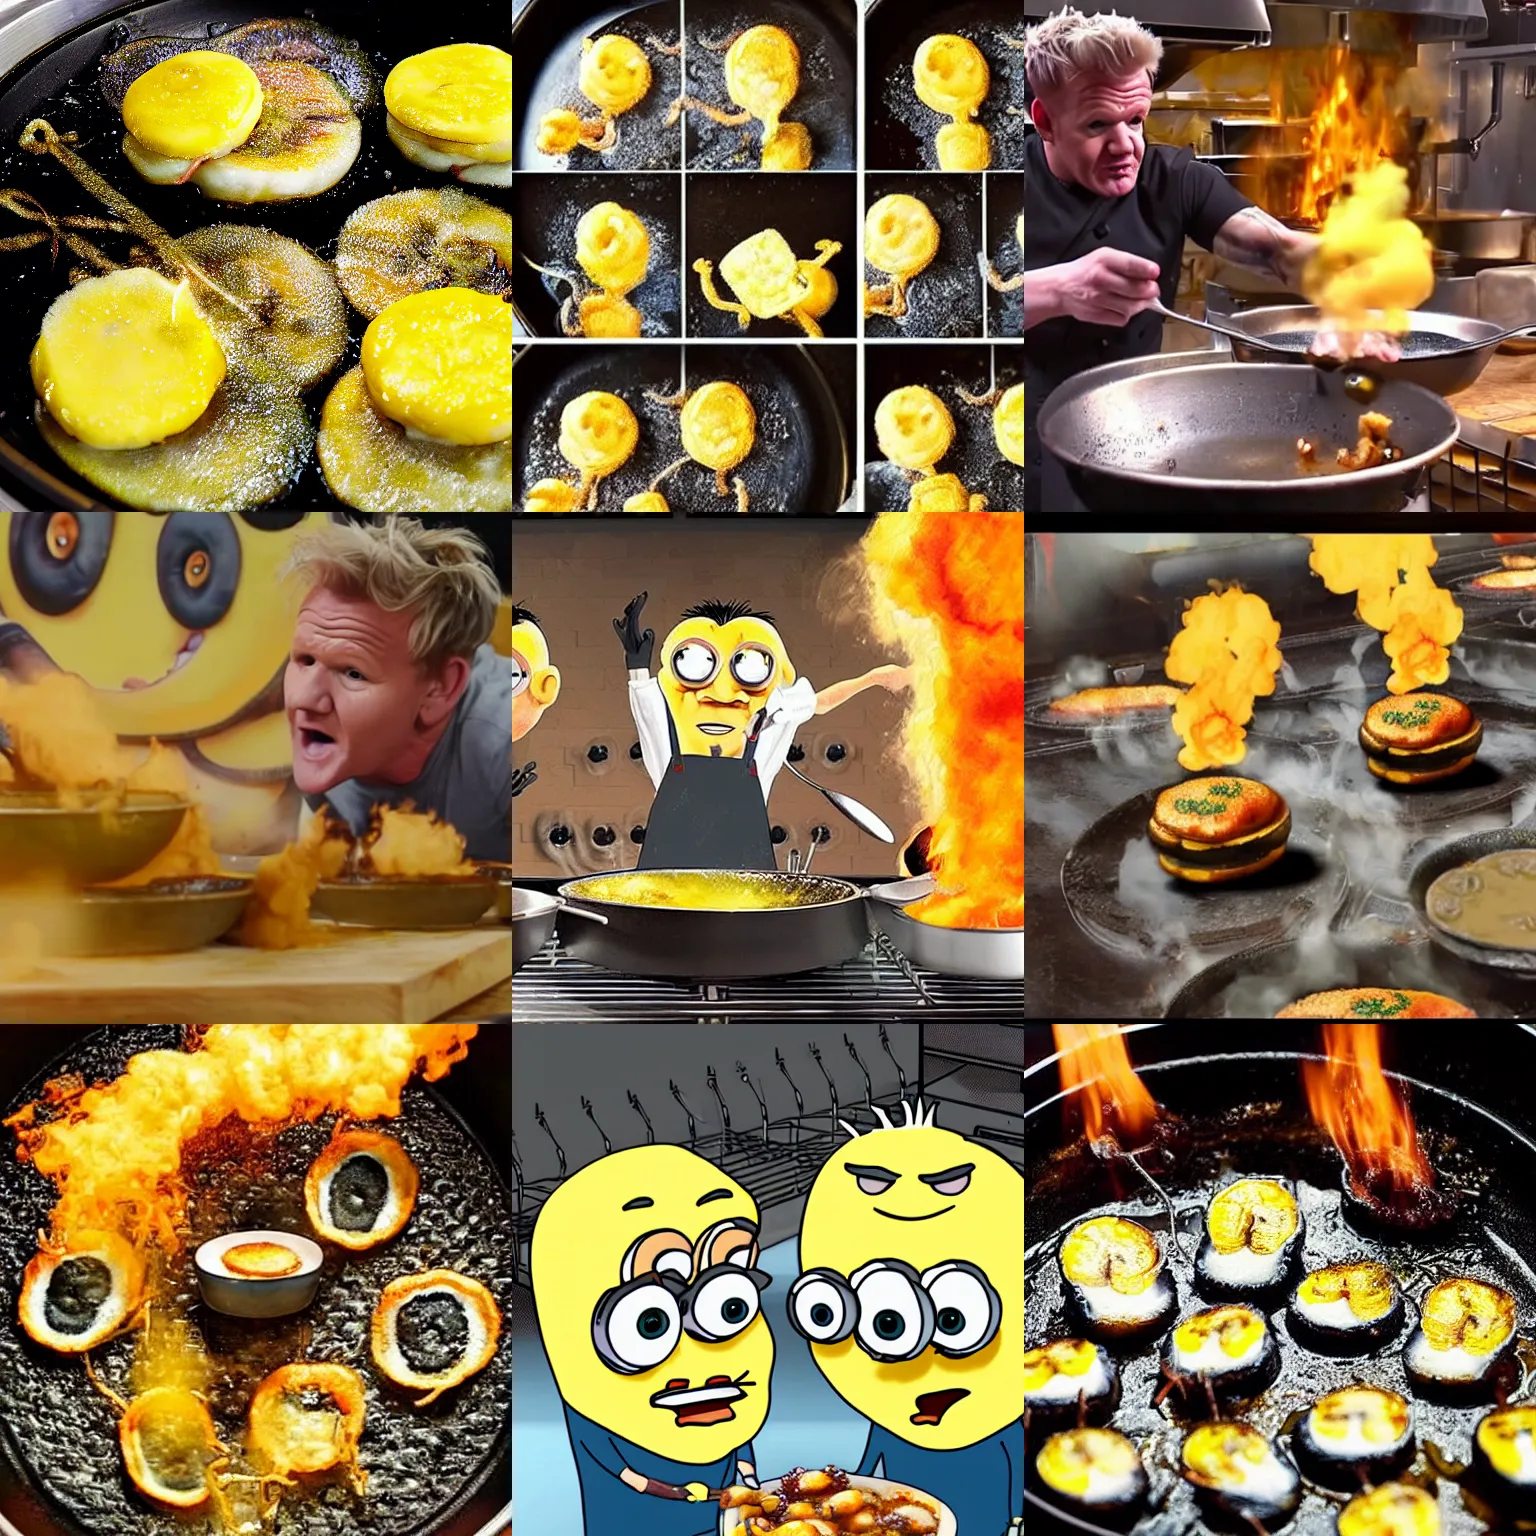 Gordon Ramsay frying minions on a pan, Stable Diffusion